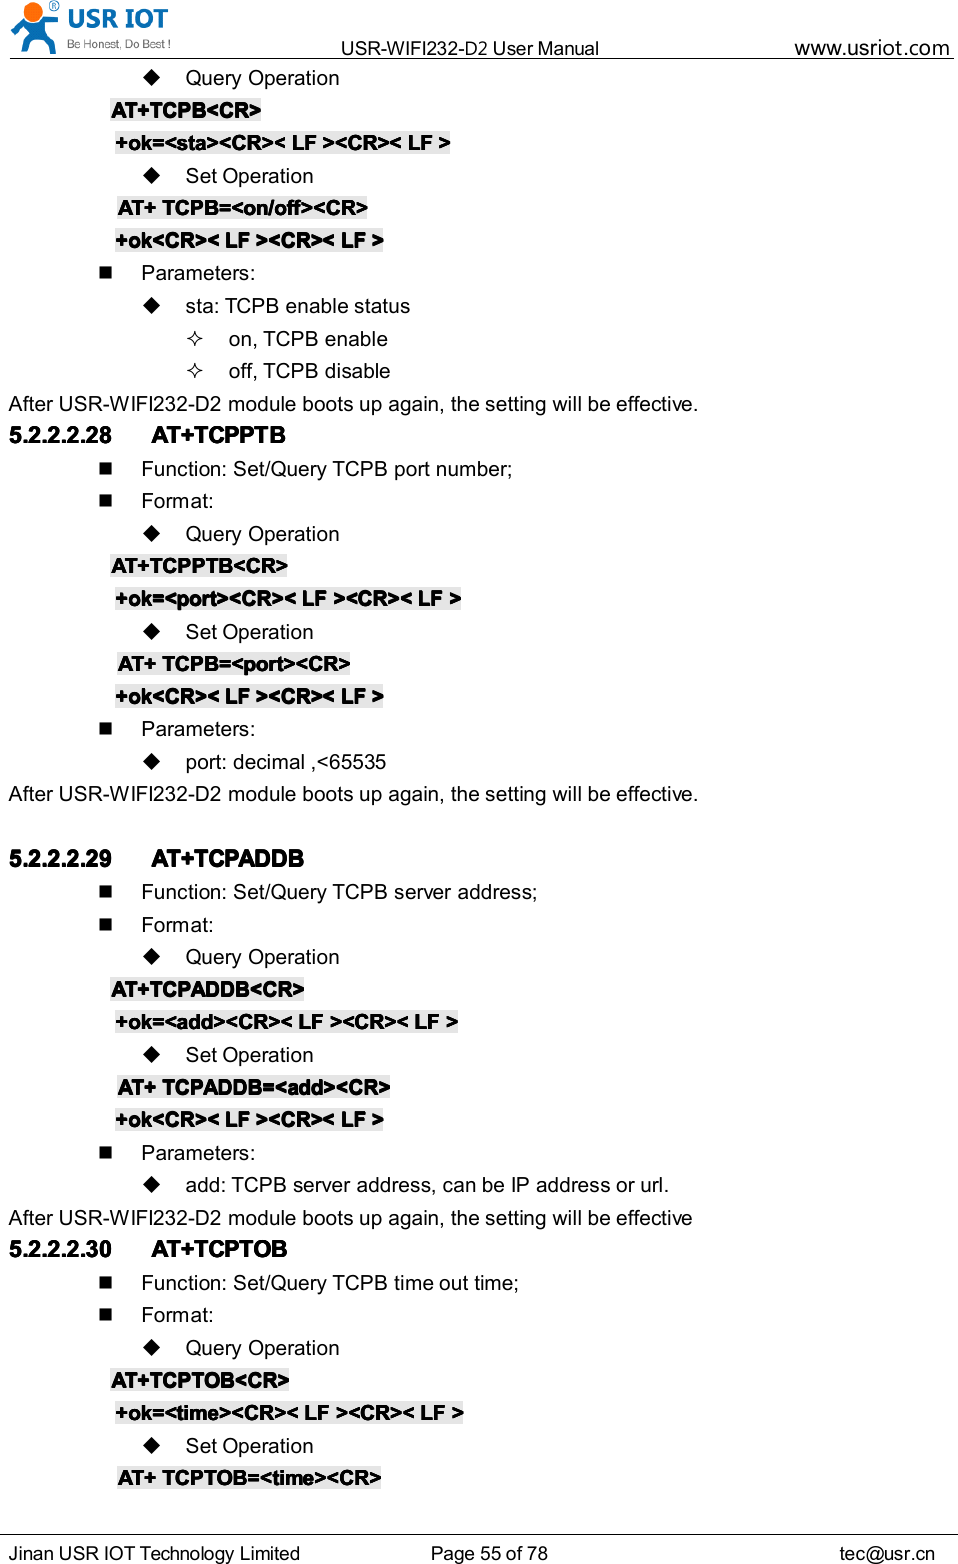 USR-WIFI232- D2 User Manual www.usr iot .comJinan USR IOT Technology Limited Page 55 of 78 tec@usr.cnQuery OperationAT+TCPB&lt;CR&gt;AT+TCPB&lt;CR&gt;AT+TCPB&lt;CR&gt;AT+TCPB&lt;CR&gt;+ok=&lt;sta&gt;&lt;CR&gt;&lt;+ok=&lt;sta&gt;&lt;CR&gt;&lt;+ok=&lt;sta&gt;&lt;CR&gt;&lt;+ok=&lt;sta&gt;&lt;CR&gt;&lt; LFLFLFLF &gt;&lt;CR&gt;&lt;&gt;&lt;CR&gt;&lt;&gt;&lt;CR&gt;&lt;&gt;&lt;CR&gt;&lt; LFLFLFLF &gt;&gt;&gt;&gt;Set OperationAT+AT+AT+AT+ TCPB=&lt;on/off&gt;&lt;CR&gt;TCPB=&lt;on/off&gt;&lt;CR&gt;TCPB=&lt;on/off&gt;&lt;CR&gt;TCPB=&lt;on/off&gt;&lt;CR&gt;+ok&lt;CR&gt;&lt;+ok&lt;CR&gt;&lt;+ok&lt;CR&gt;&lt;+ok&lt;CR&gt;&lt; LFLFLFLF &gt;&lt;CR&gt;&lt;&gt;&lt;CR&gt;&lt;&gt;&lt;CR&gt;&lt;&gt;&lt;CR&gt;&lt; LFLFLFLF &gt;&gt;&gt;&gt;Parameters:sta: TCPB enable statuson, TCPB enableoff, TCPB disableAfter USR-WIFI232-D2 module boots up again, the setting will be effective.5.2.2.2.285.2.2.2.285.2.2.2.285.2.2.2.28 AT+TCPPTBAT+TCPPTBAT+TCPPTBAT+TCPPTBFunction: Set/Query TCPB port number;Format:Query OperationAT+TCPPTB&lt;CR&gt;AT+TCPPTB&lt;CR&gt;AT+TCPPTB&lt;CR&gt;AT+TCPPTB&lt;CR&gt;+ok=&lt;port&gt;&lt;CR&gt;&lt;+ok=&lt;port&gt;&lt;CR&gt;&lt;+ok=&lt;port&gt;&lt;CR&gt;&lt;+ok=&lt;port&gt;&lt;CR&gt;&lt; LFLFLFLF &gt;&lt;CR&gt;&lt;&gt;&lt;CR&gt;&lt;&gt;&lt;CR&gt;&lt;&gt;&lt;CR&gt;&lt; LFLFLFLF &gt;&gt;&gt;&gt;Set OperationAT+AT+AT+AT+ TCPB=&lt;port&gt;&lt;CR&gt;TCPB=&lt;port&gt;&lt;CR&gt;TCPB=&lt;port&gt;&lt;CR&gt;TCPB=&lt;port&gt;&lt;CR&gt;+ok&lt;CR&gt;&lt;+ok&lt;CR&gt;&lt;+ok&lt;CR&gt;&lt;+ok&lt;CR&gt;&lt; LFLFLFLF &gt;&lt;CR&gt;&lt;&gt;&lt;CR&gt;&lt;&gt;&lt;CR&gt;&lt;&gt;&lt;CR&gt;&lt; LFLFLFLF &gt;&gt;&gt;&gt;Parameters:port: decimal ,&lt;65535After USR-WIFI232-D2 module boots up again, the setting will be effective.5.2.2.2.295.2.2.2.295.2.2.2.295.2.2.2.29 AT+TCPADDBAT+TCPADDBAT+TCPADDBAT+TCPADDBFunction: Set/Query TCPB server address;Format:Query OperationAT+TCPADDB&lt;CR&gt;AT+TCPADDB&lt;CR&gt;AT+TCPADDB&lt;CR&gt;AT+TCPADDB&lt;CR&gt;+ok=&lt;add&gt;&lt;CR&gt;&lt;+ok=&lt;add&gt;&lt;CR&gt;&lt;+ok=&lt;add&gt;&lt;CR&gt;&lt;+ok=&lt;add&gt;&lt;CR&gt;&lt; LFLFLFLF &gt;&lt;CR&gt;&lt;&gt;&lt;CR&gt;&lt;&gt;&lt;CR&gt;&lt;&gt;&lt;CR&gt;&lt; LFLFLFLF &gt;&gt;&gt;&gt;Set OperationAT+AT+AT+AT+ TCPADDB=&lt;add&gt;&lt;CR&gt;TCPADDB=&lt;add&gt;&lt;CR&gt;TCPADDB=&lt;add&gt;&lt;CR&gt;TCPADDB=&lt;add&gt;&lt;CR&gt;+ok&lt;CR&gt;&lt;+ok&lt;CR&gt;&lt;+ok&lt;CR&gt;&lt;+ok&lt;CR&gt;&lt; LFLFLFLF &gt;&lt;CR&gt;&lt;&gt;&lt;CR&gt;&lt;&gt;&lt;CR&gt;&lt;&gt;&lt;CR&gt;&lt; LFLFLFLF &gt;&gt;&gt;&gt;Parameters:add: TCPB server address, can be IP address or url.After USR-WIFI232-D2 module boots up again, the setting will be effective5.2.2.2.305.2.2.2.305.2.2.2.305.2.2.2.30 AT+TCPTOBAT+TCPTOBAT+TCPTOBAT+TCPTOBFunction: Set/Query TCPB time out time;Format:Query OperationAT+TCPTOB&lt;CR&gt;AT+TCPTOB&lt;CR&gt;AT+TCPTOB&lt;CR&gt;AT+TCPTOB&lt;CR&gt;+ok=&lt;time&gt;&lt;CR&gt;&lt;+ok=&lt;time&gt;&lt;CR&gt;&lt;+ok=&lt;time&gt;&lt;CR&gt;&lt;+ok=&lt;time&gt;&lt;CR&gt;&lt; LFLFLFLF &gt;&lt;CR&gt;&lt;&gt;&lt;CR&gt;&lt;&gt;&lt;CR&gt;&lt;&gt;&lt;CR&gt;&lt; LFLFLFLF &gt;&gt;&gt;&gt;Set OperationAT+AT+AT+AT+ TCPTOB=&lt;time&gt;&lt;CR&gt;TCPTOB=&lt;time&gt;&lt;CR&gt;TCPTOB=&lt;time&gt;&lt;CR&gt;TCPTOB=&lt;time&gt;&lt;CR&gt;